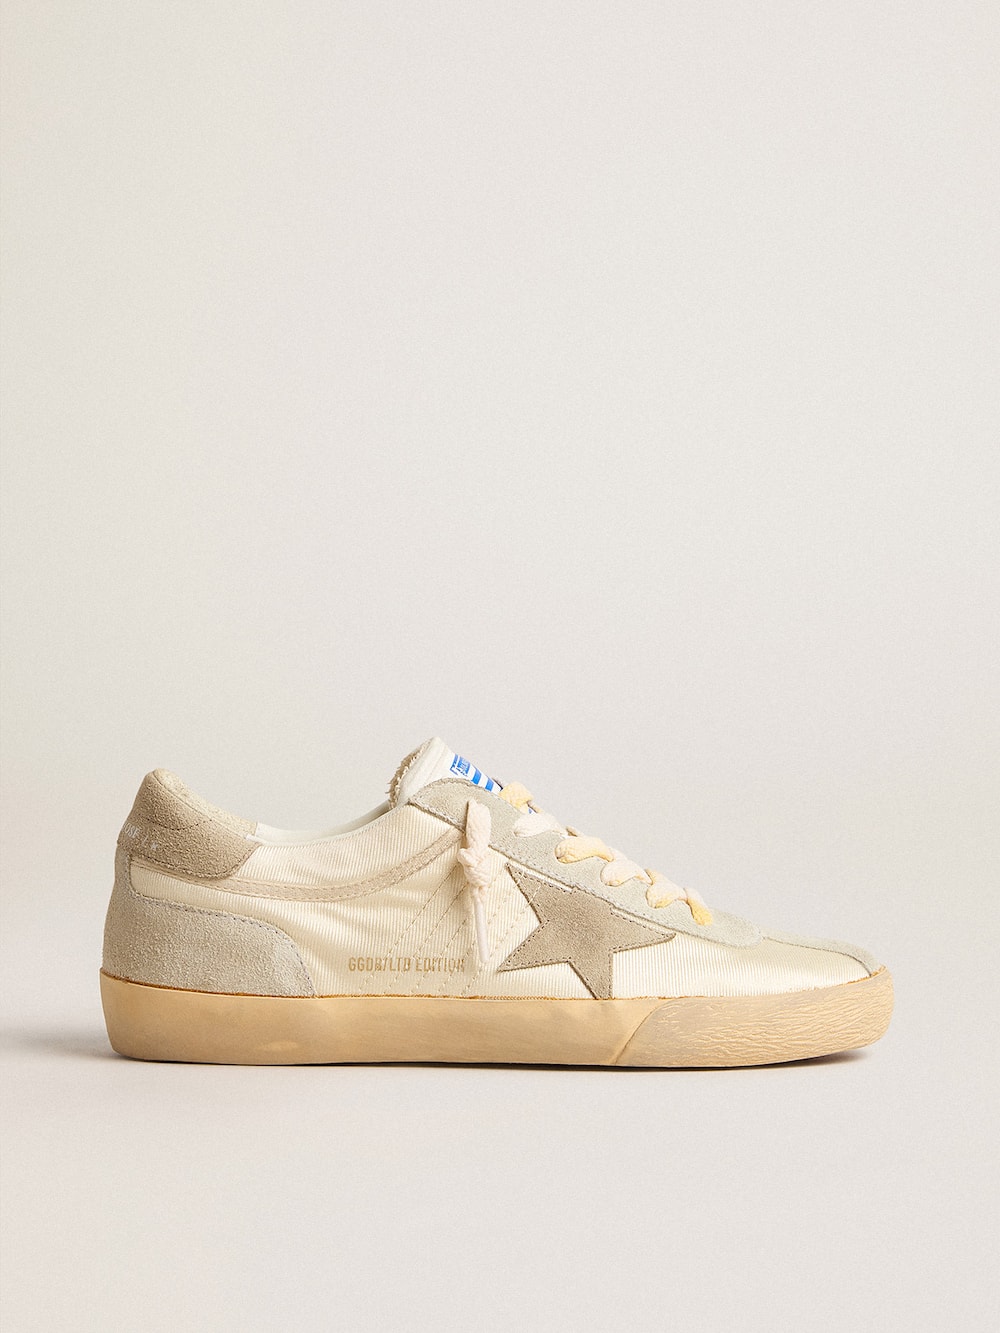 Golden Goose - Women’s Super-Star LAB in nylon with dove-gray star and ice-gray suede inserts in 